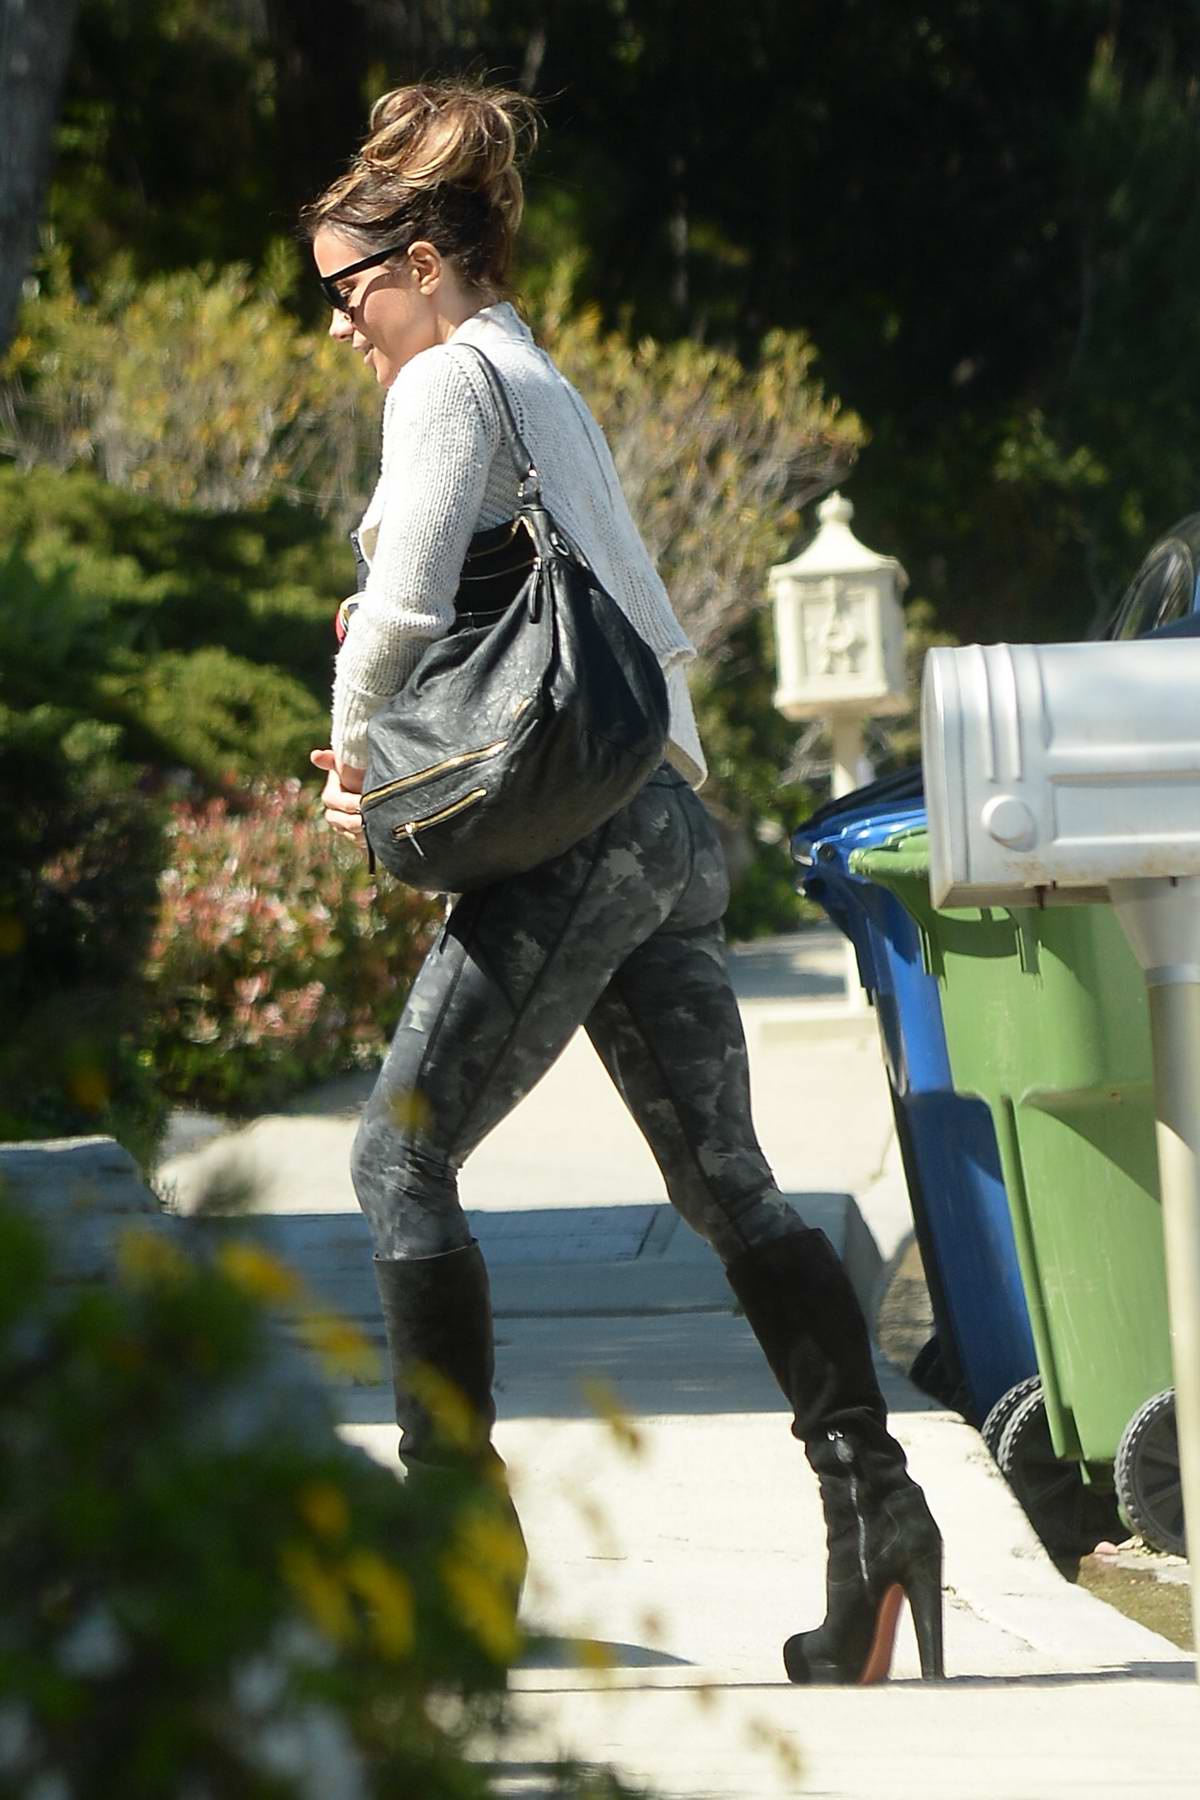 kate beckinsale rocks camo leggings as she steps out after a workout